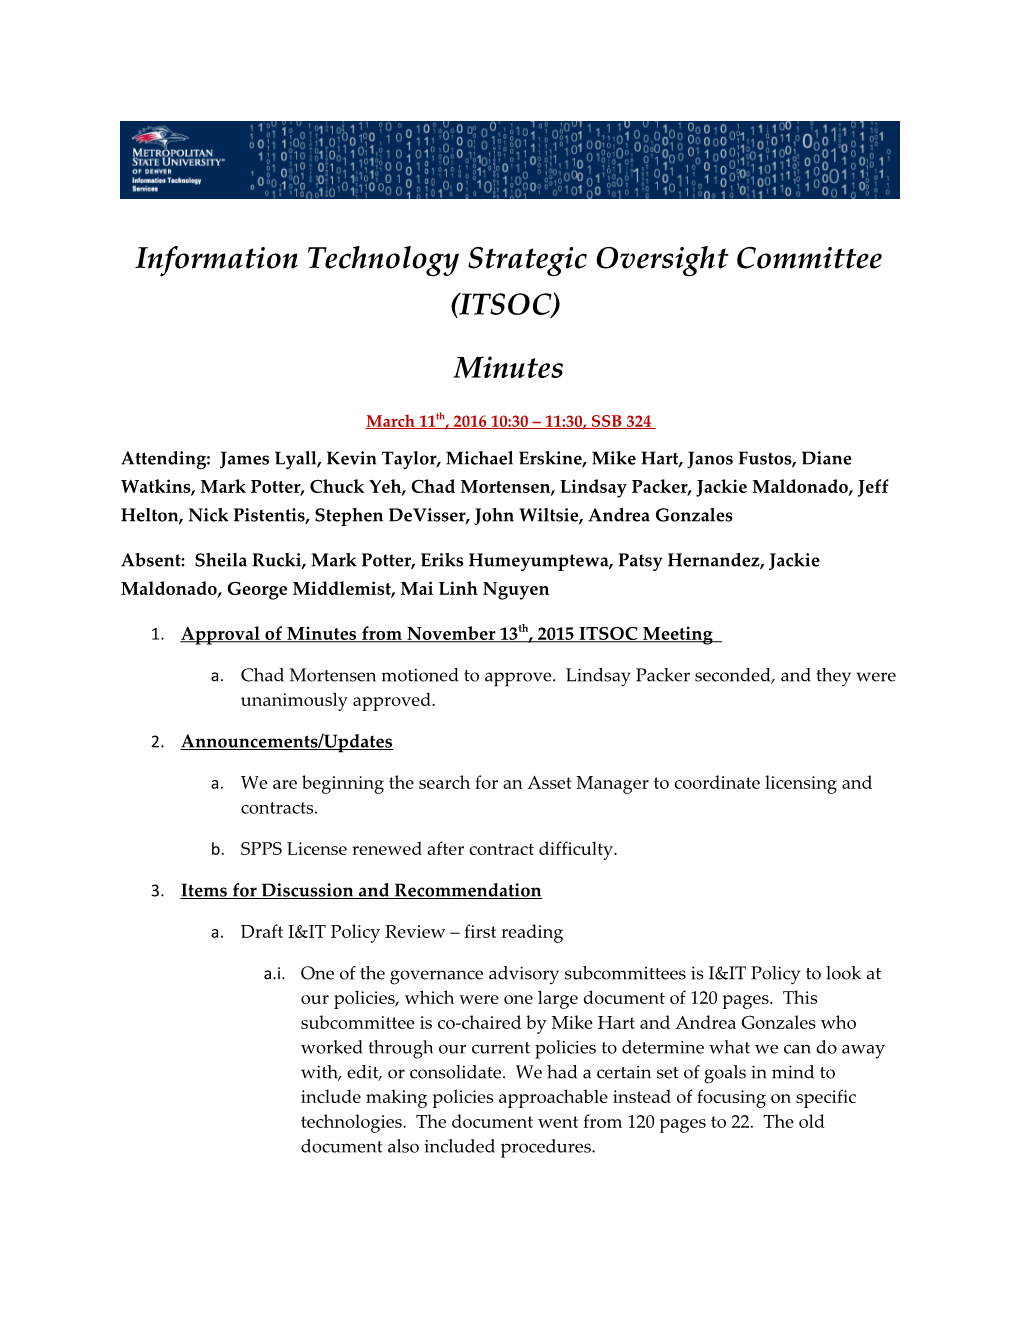 Information Technology Strategic Oversight Committee (ITSOC)